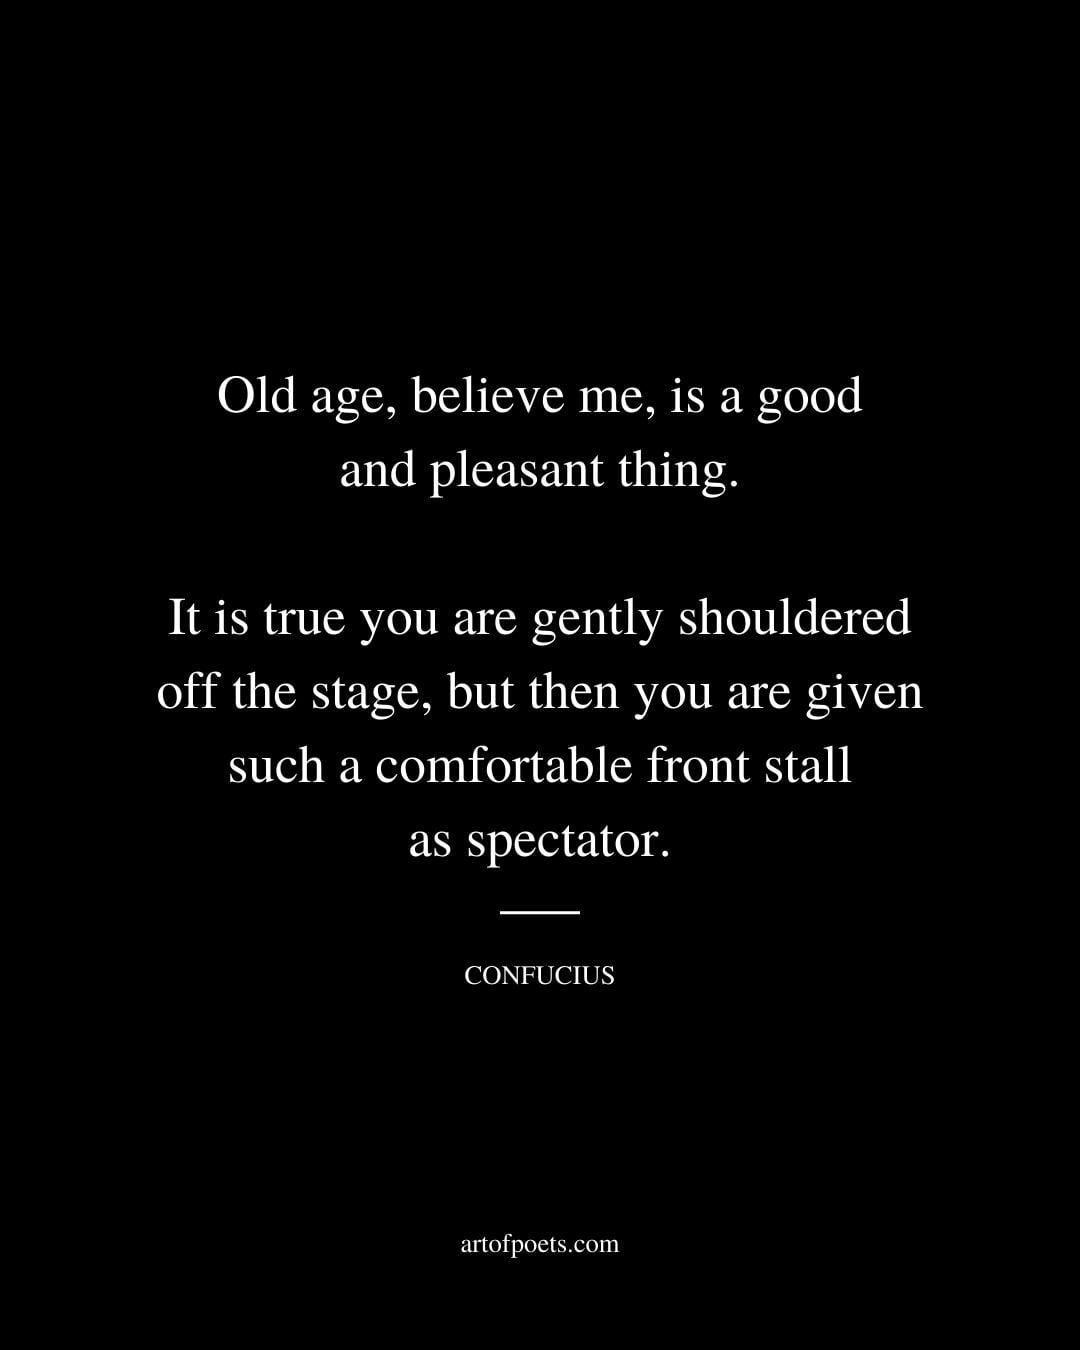 Old age believe me is a good and pleasant thing 1